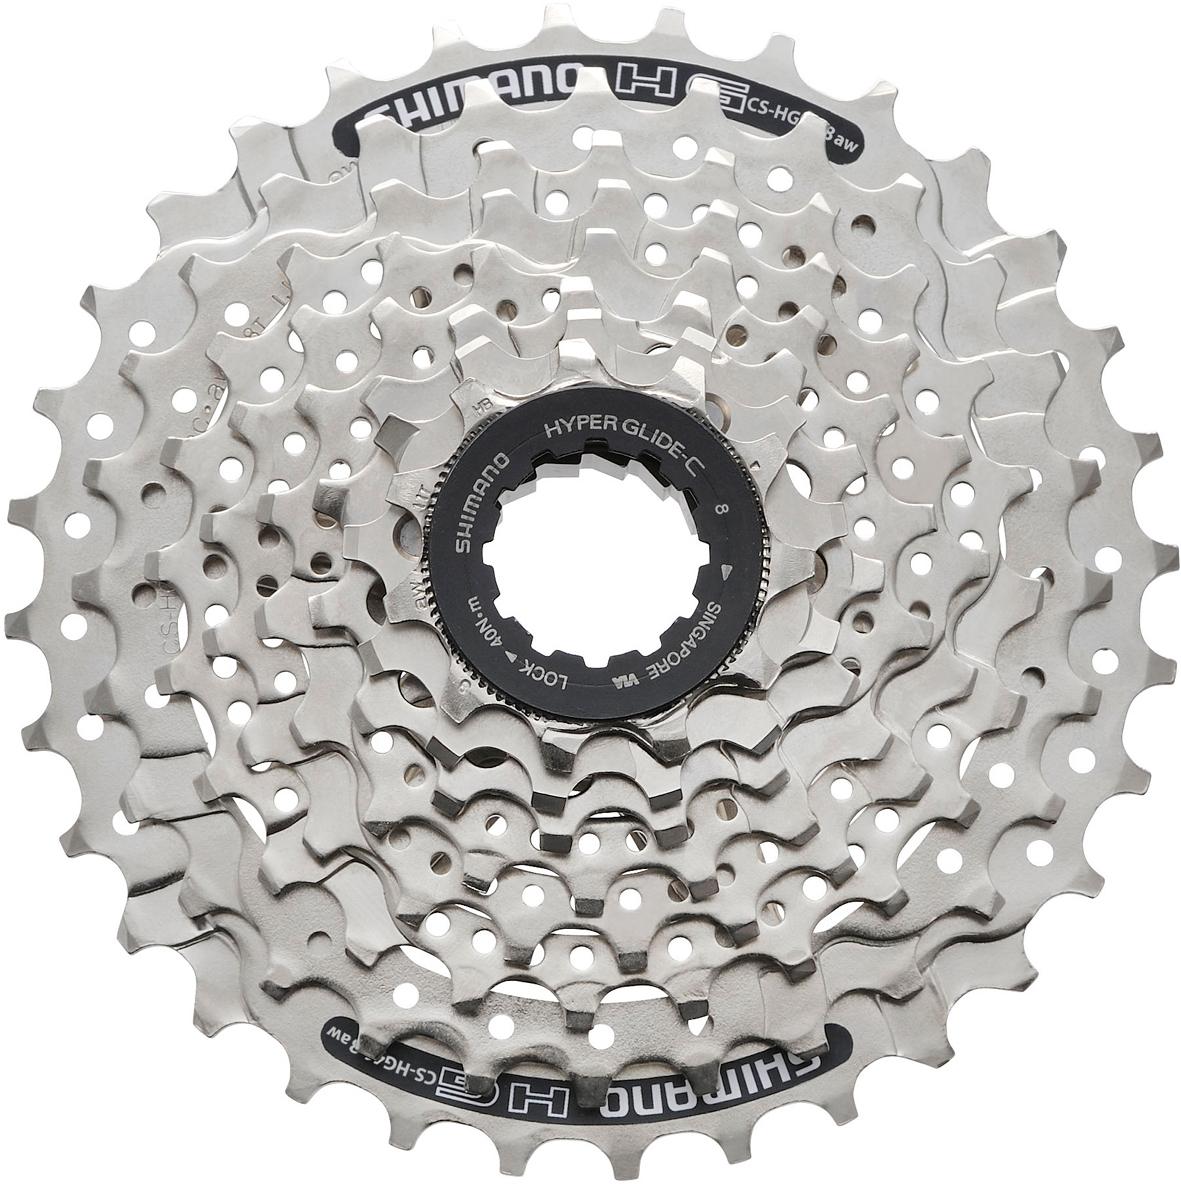 Shimano Hg41 8 Speed Cassette - Silver